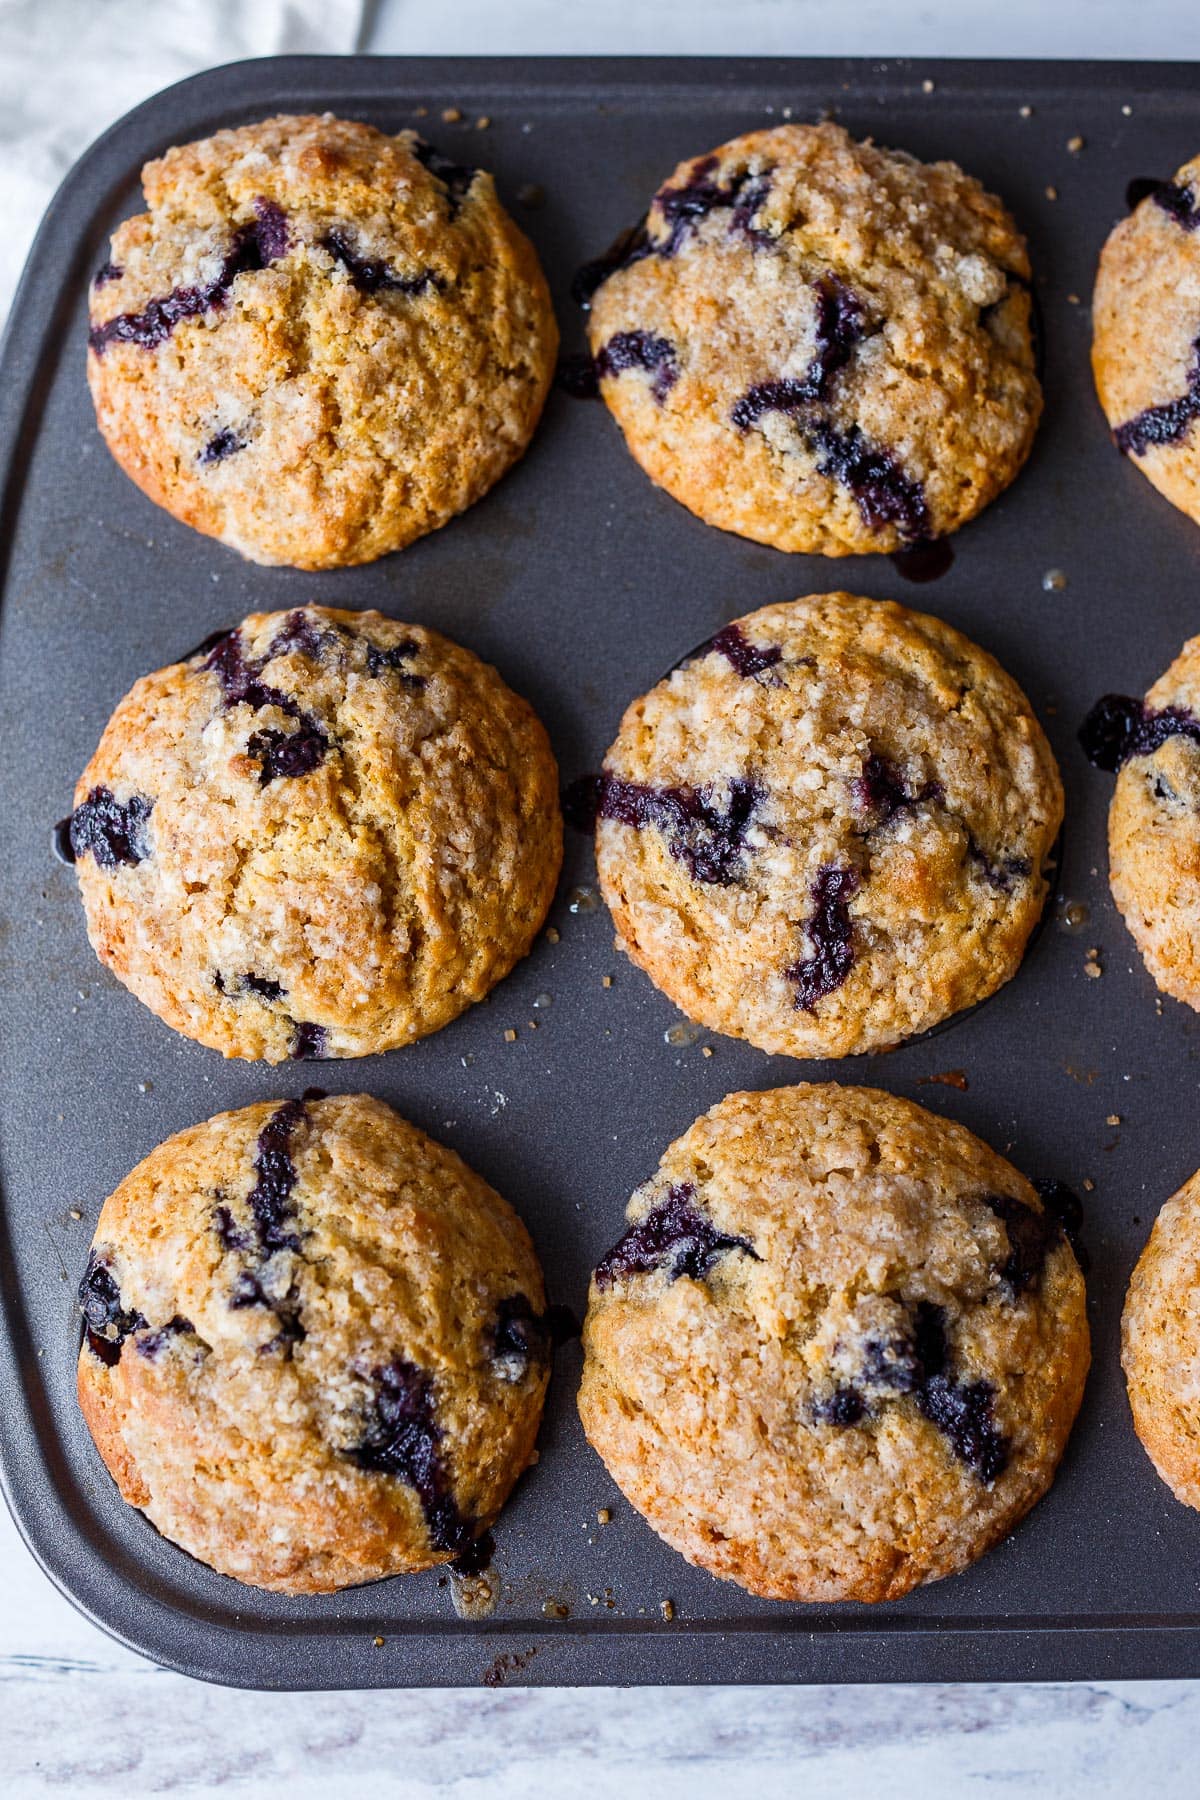 Tender Blueberry Muffins lightly sweetened with lemon zest and cardamom made with fresh or frozen blueberries. A delicious breakfast or afternoon snack. Gluten free adaptable.